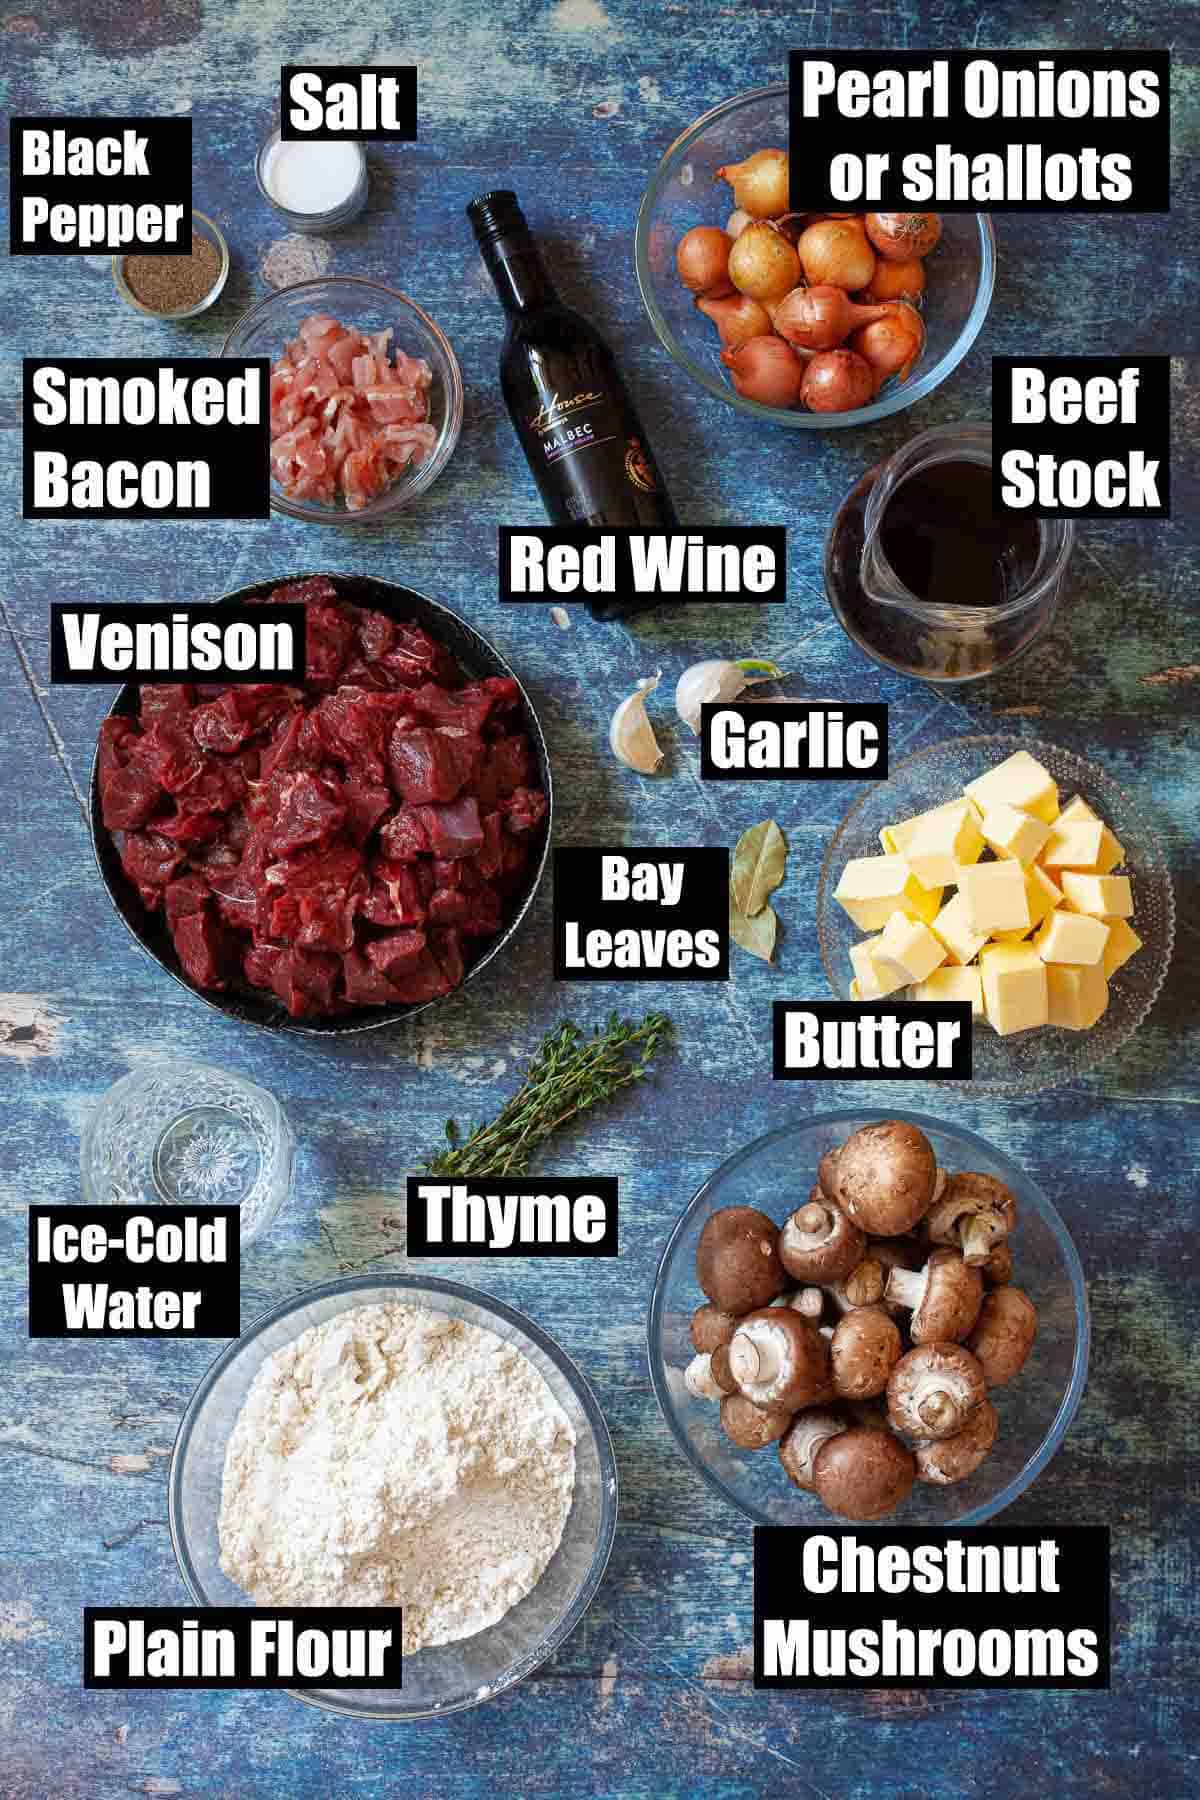 Labelled ingredients for venison pie with mushrooms and bacon.